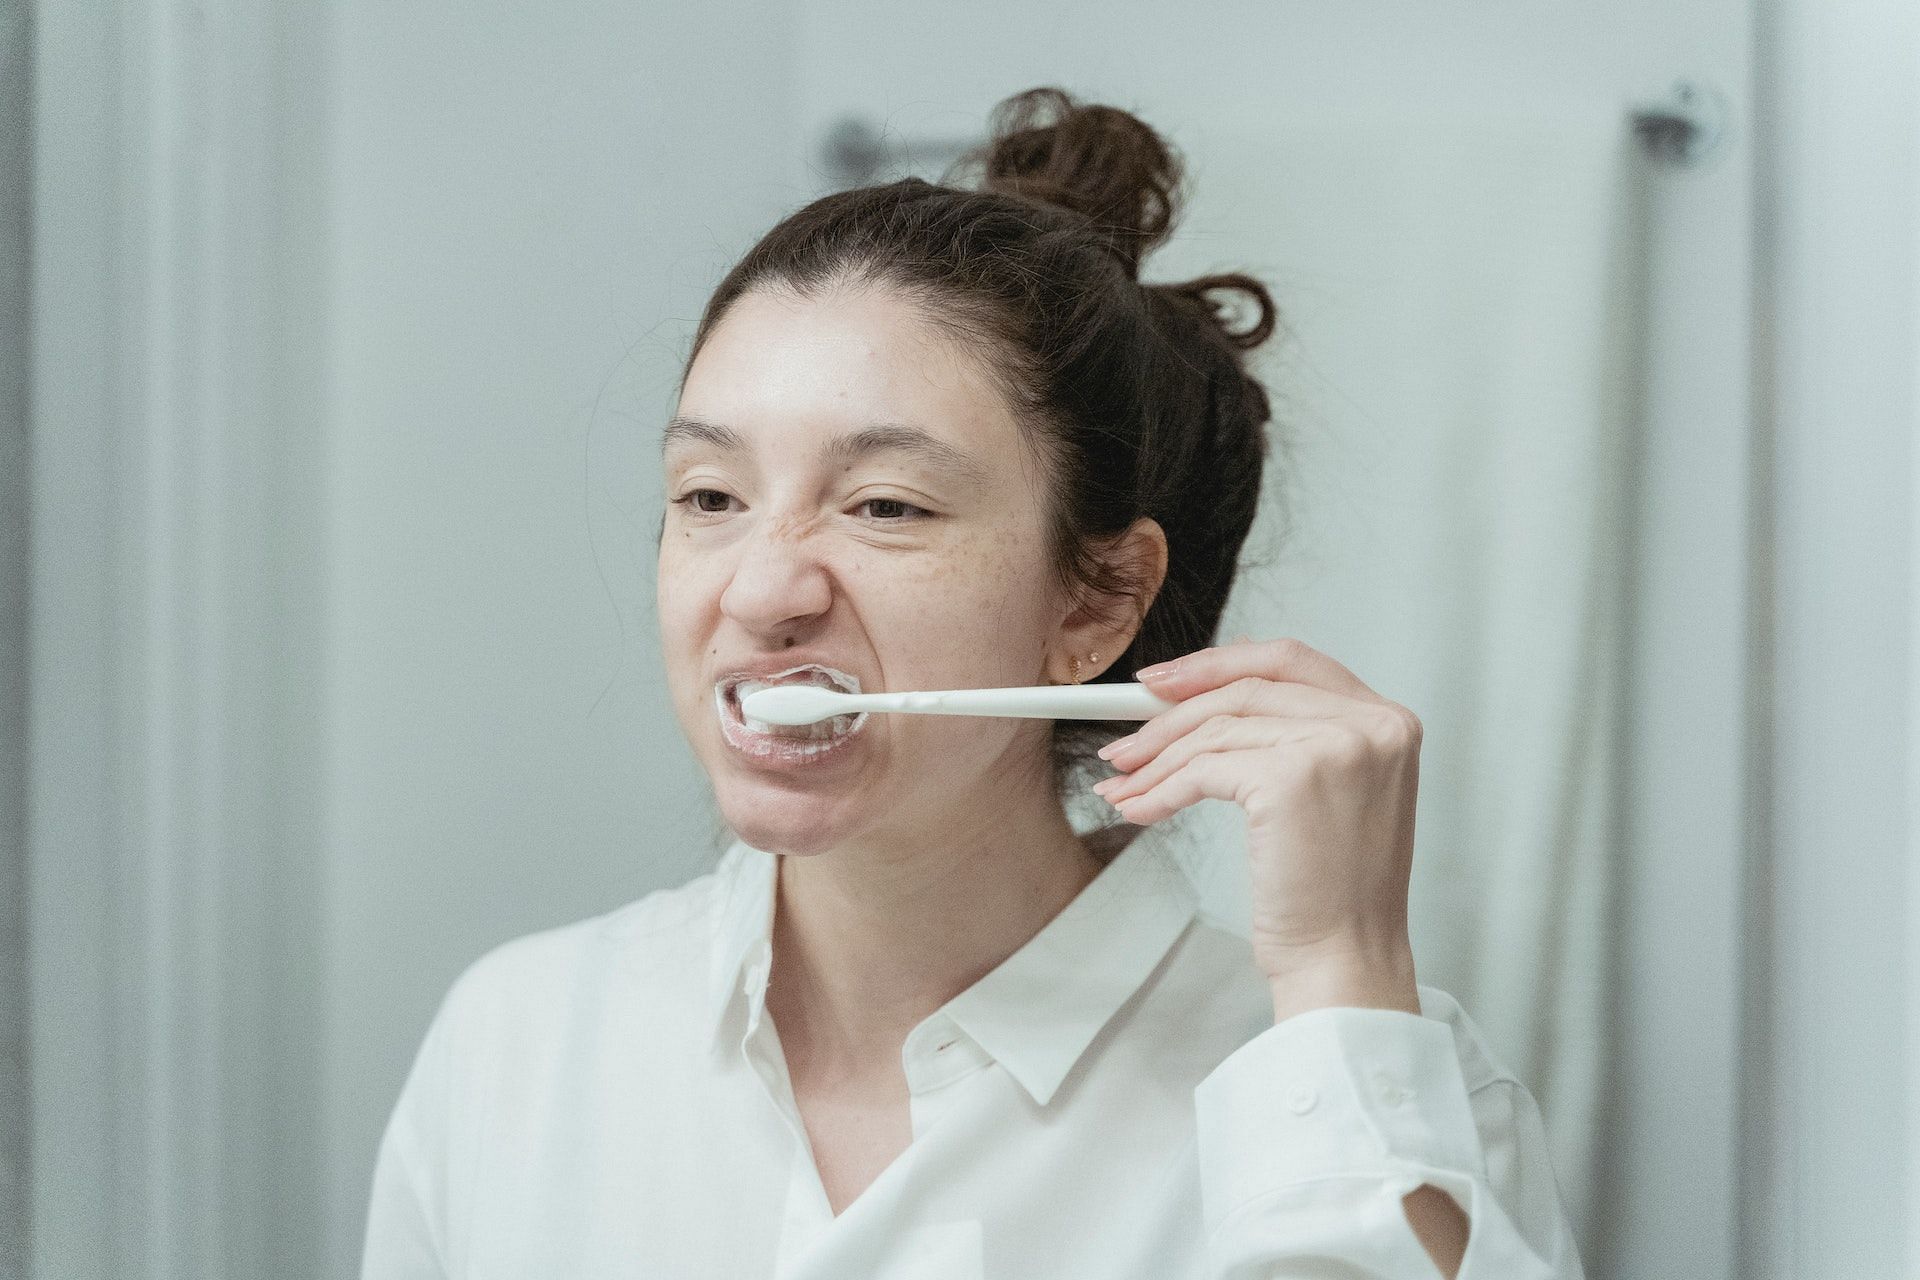 People with poor oral hygiene are more likely to get alveolar osteitis. (Photo via Pexels/Miriam Alonso)